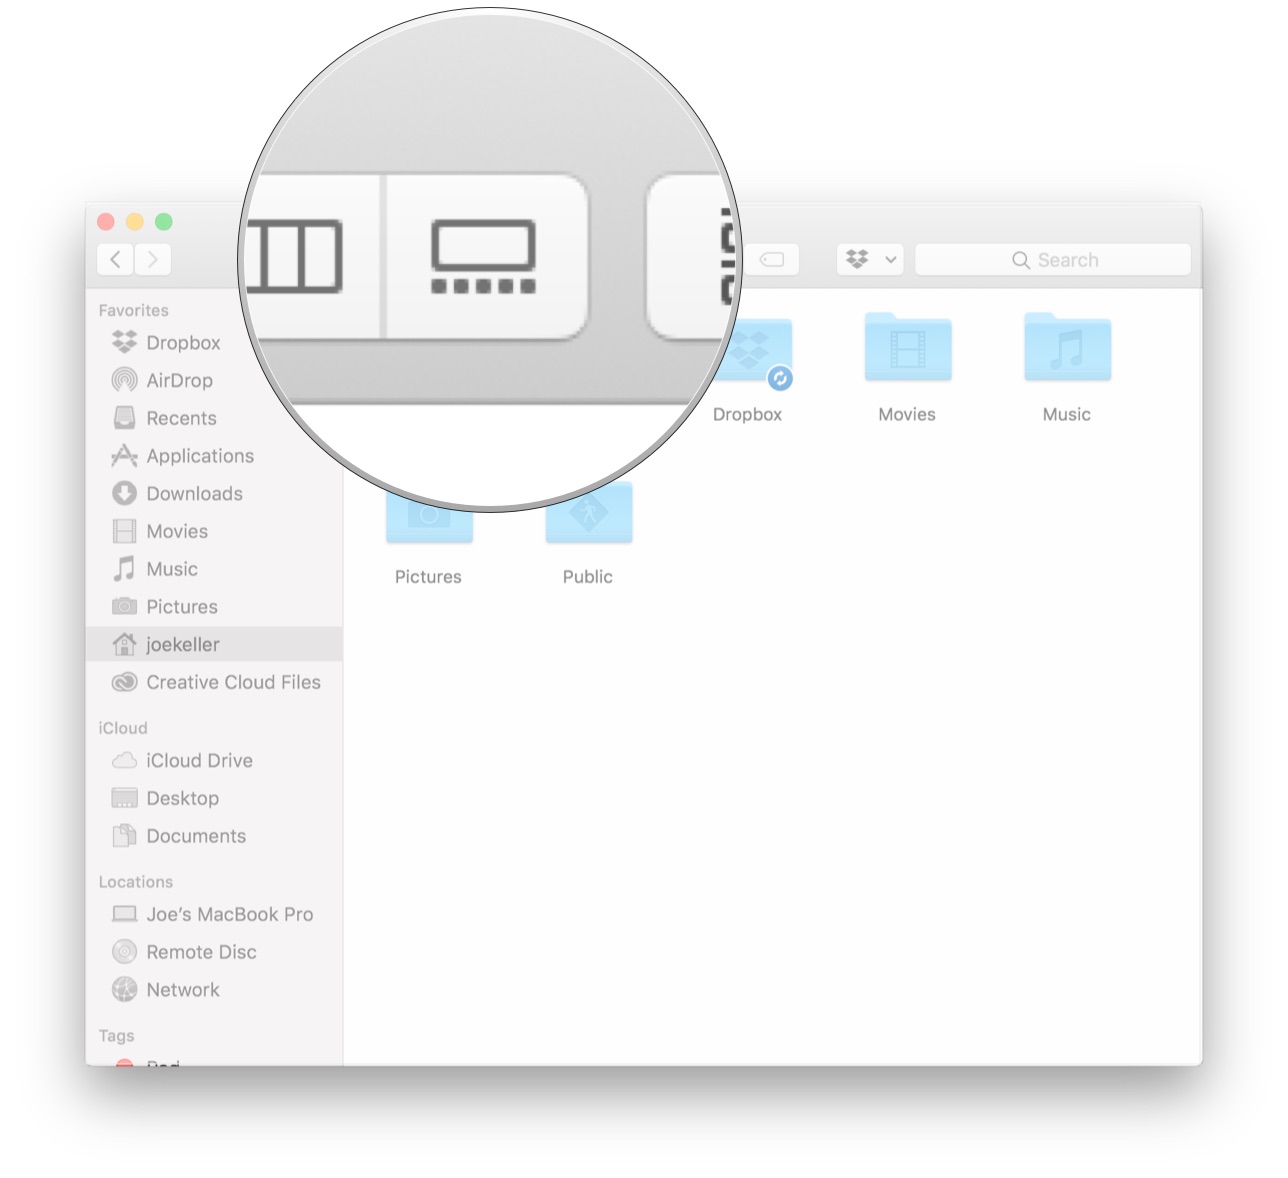 To use Gallery View in Finder, click the Gallery View button. 